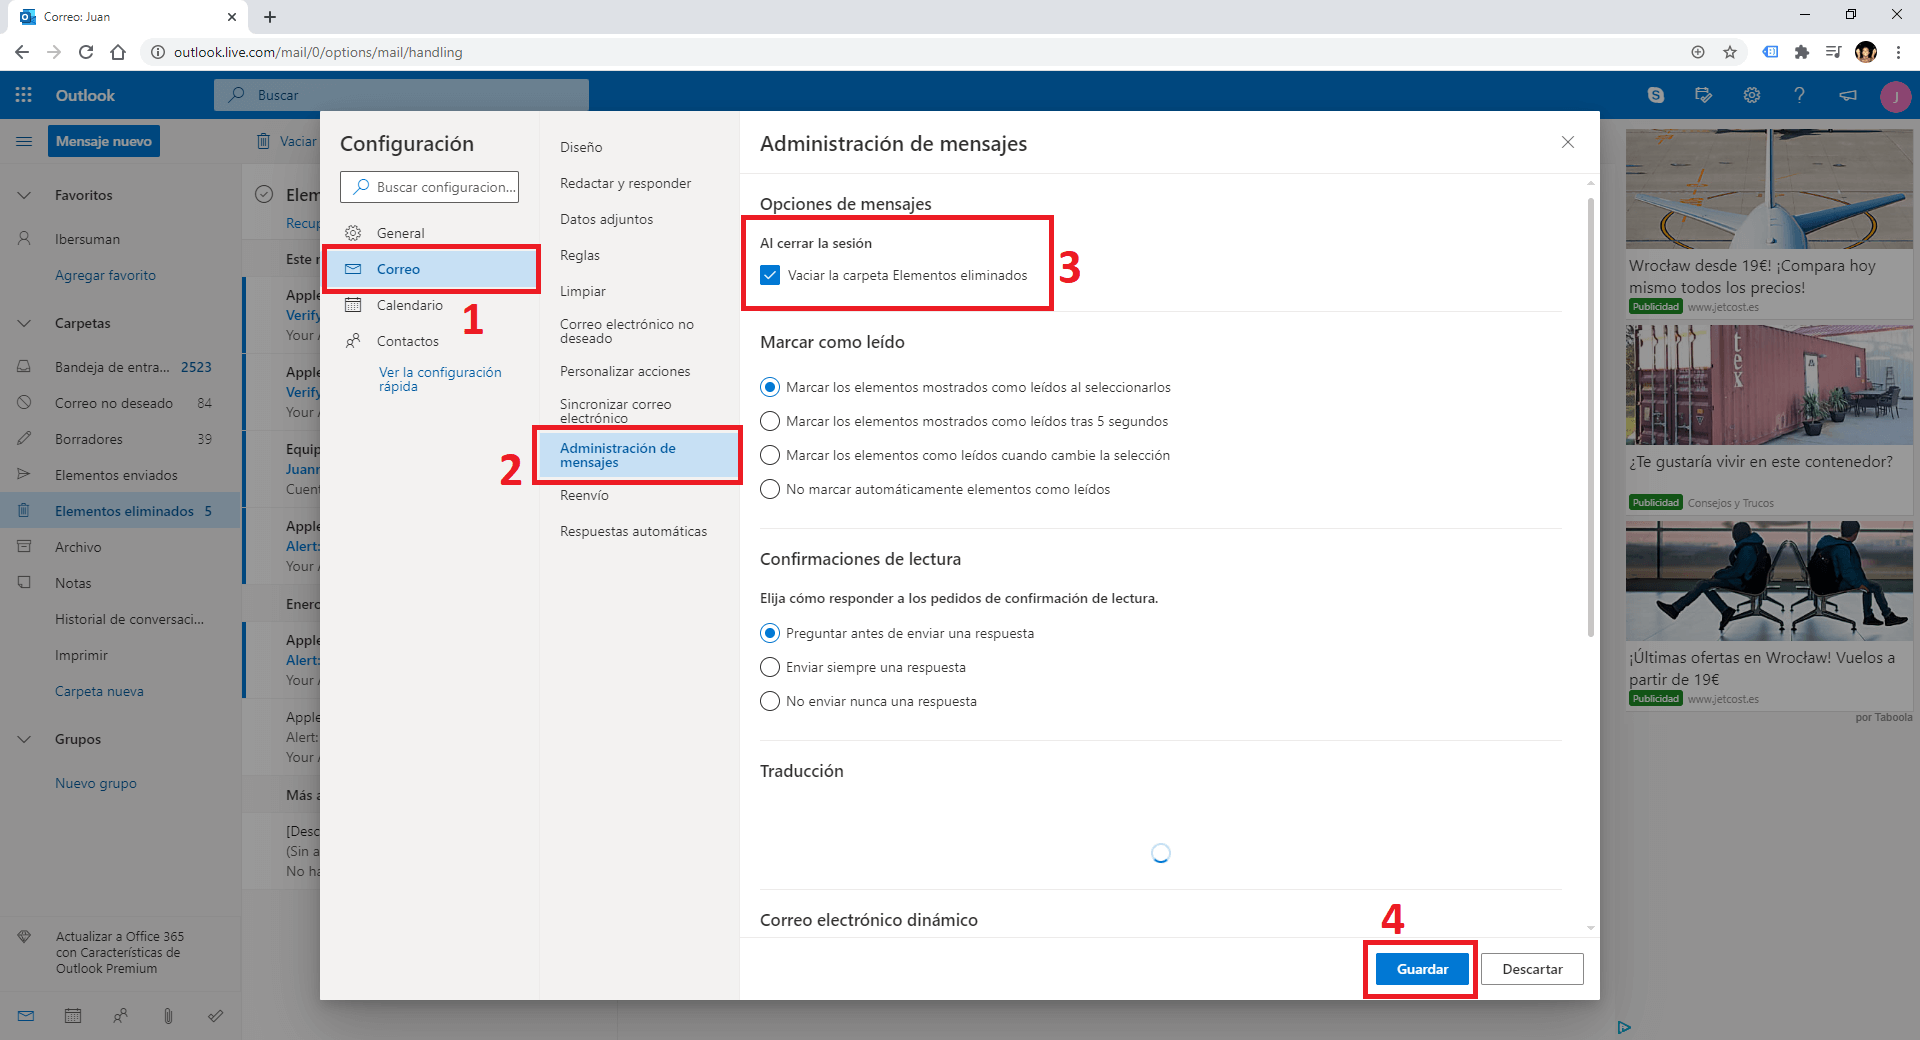 automatically delete emails from the Deleted Items folder when you log out of Outlook